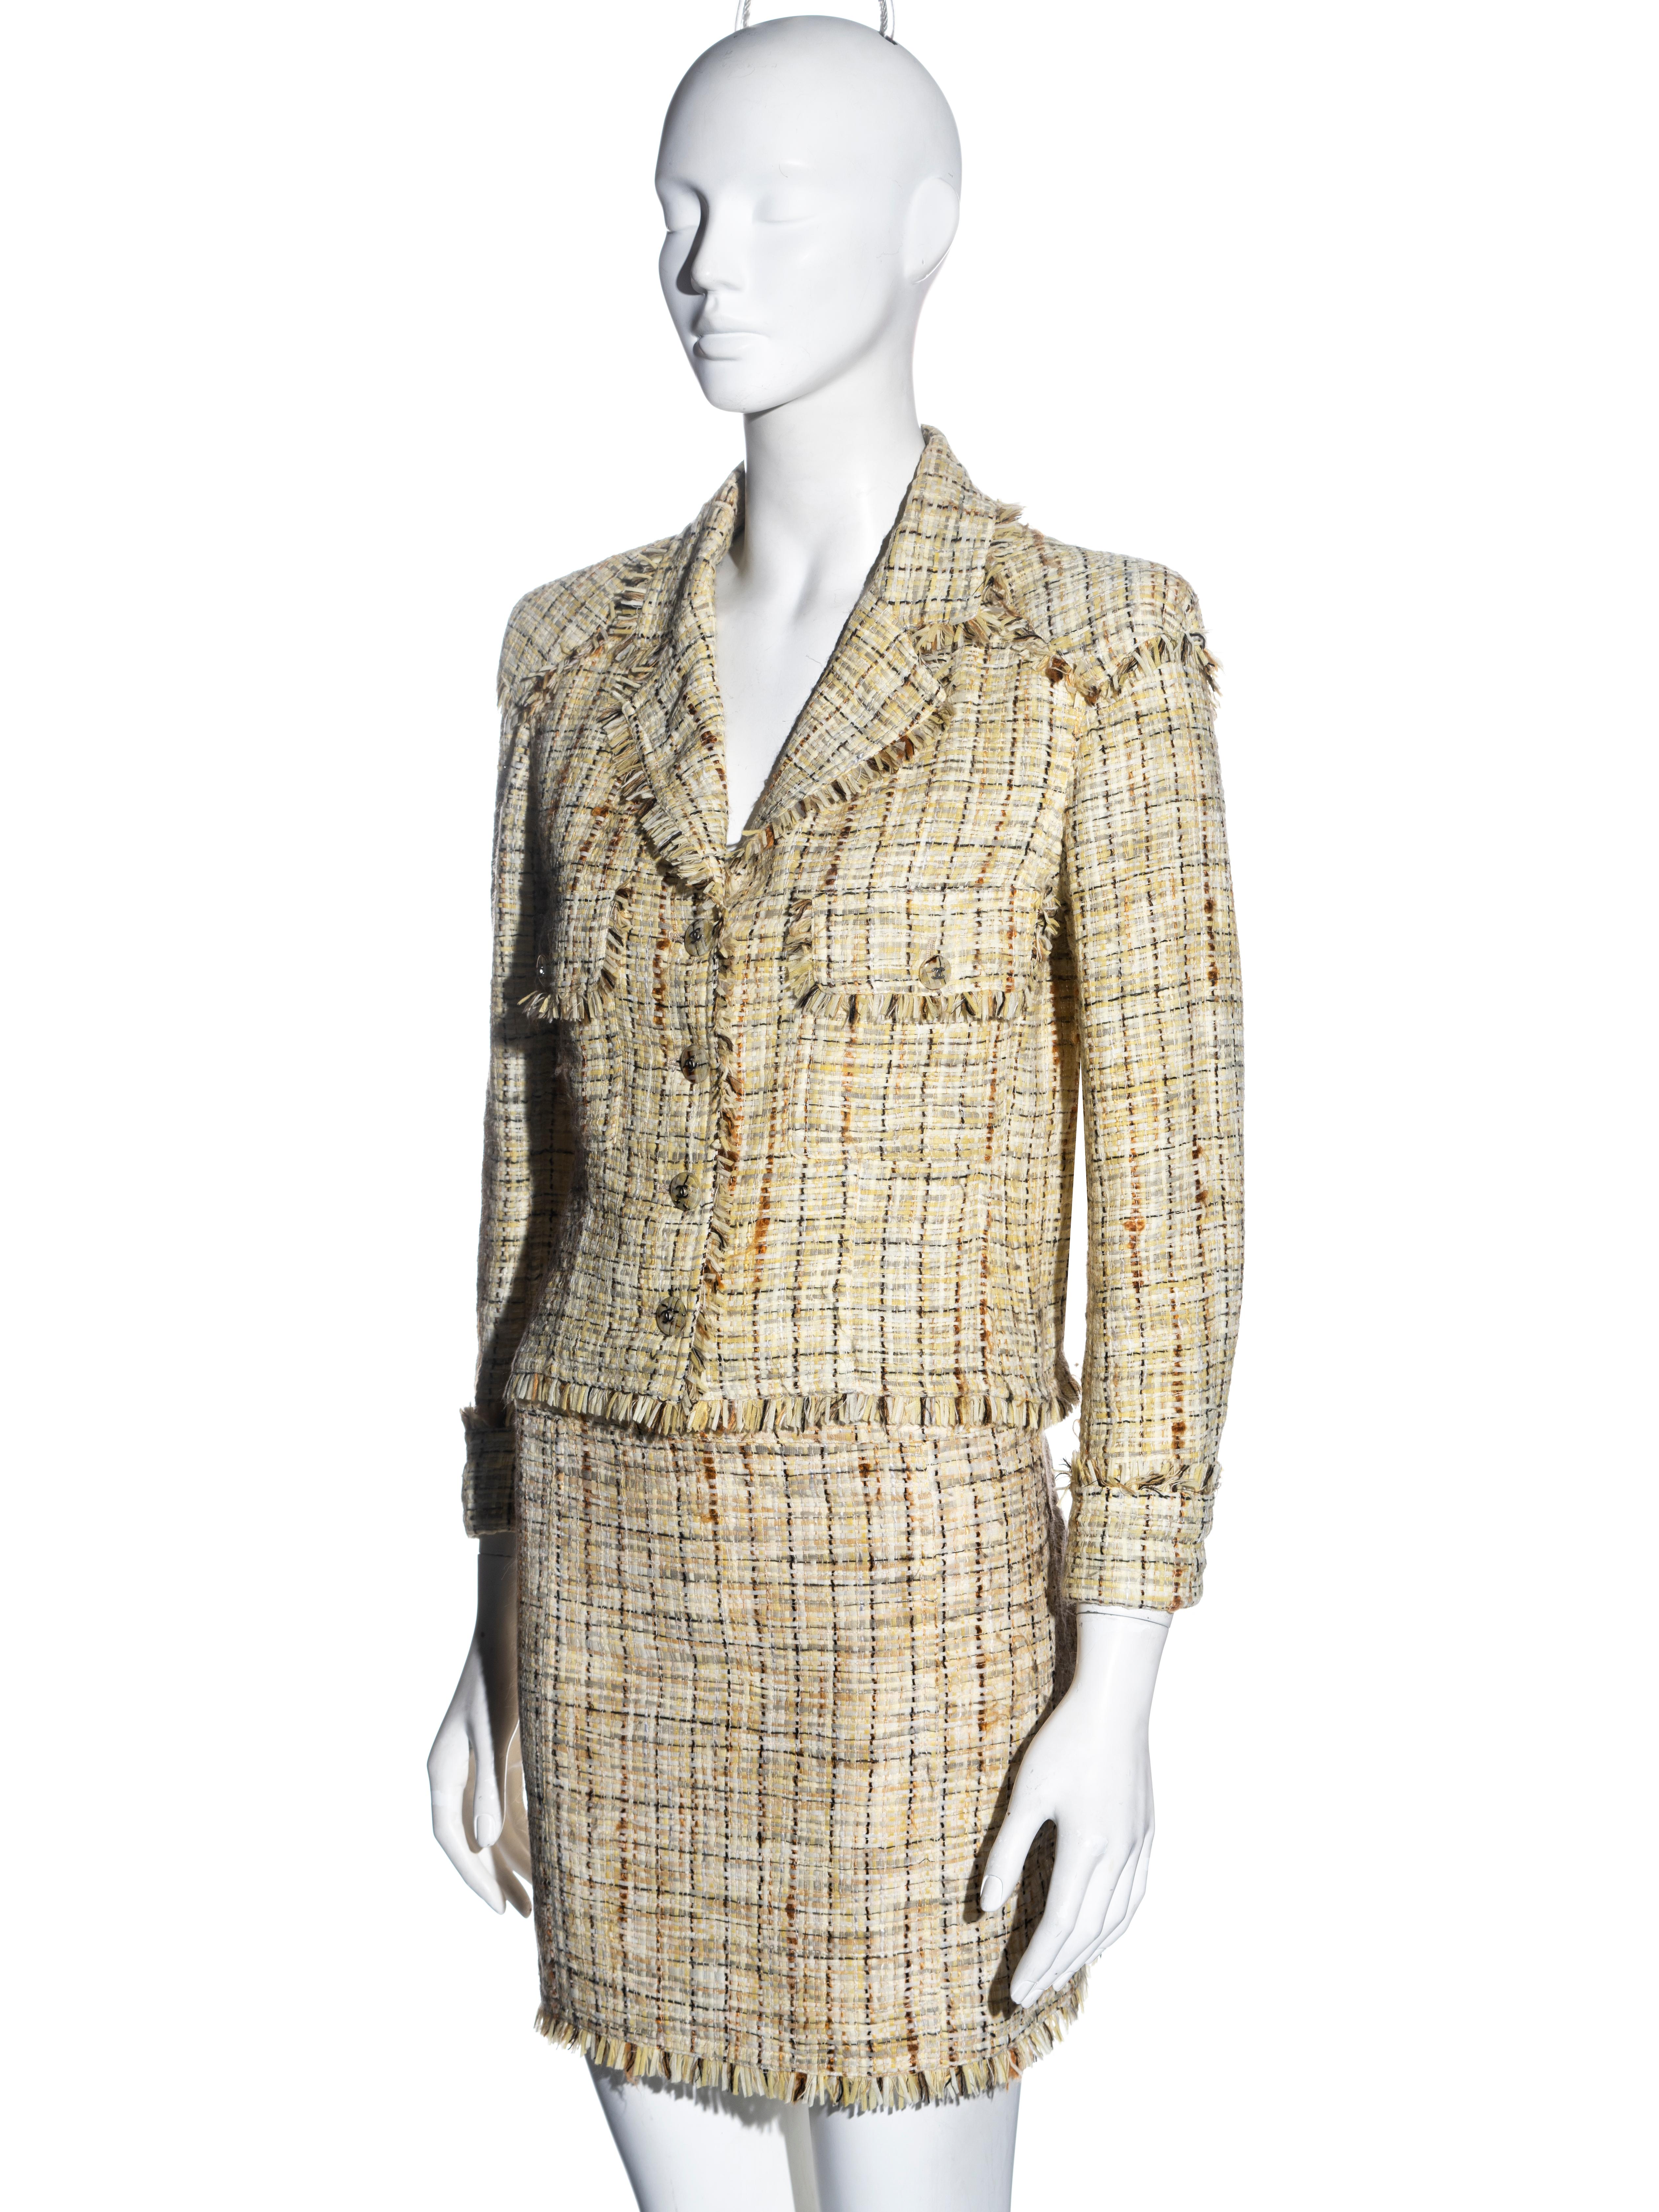 Beige Chanel by Karl Lagerfeld yellow tweed jacket and skirt suit, ss 1998 For Sale